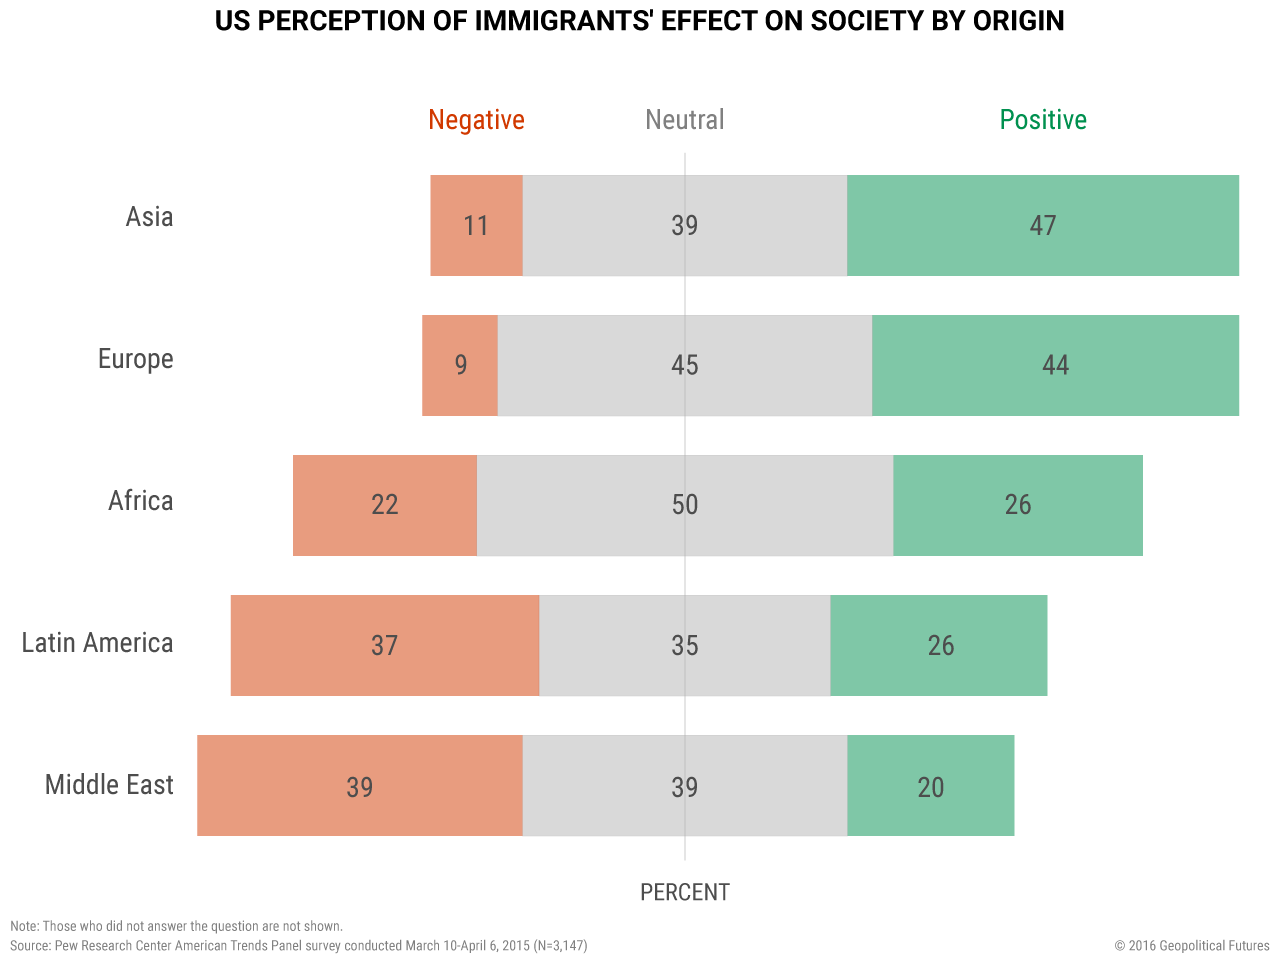 US Perception of Immigrants Effect on Society by Origin